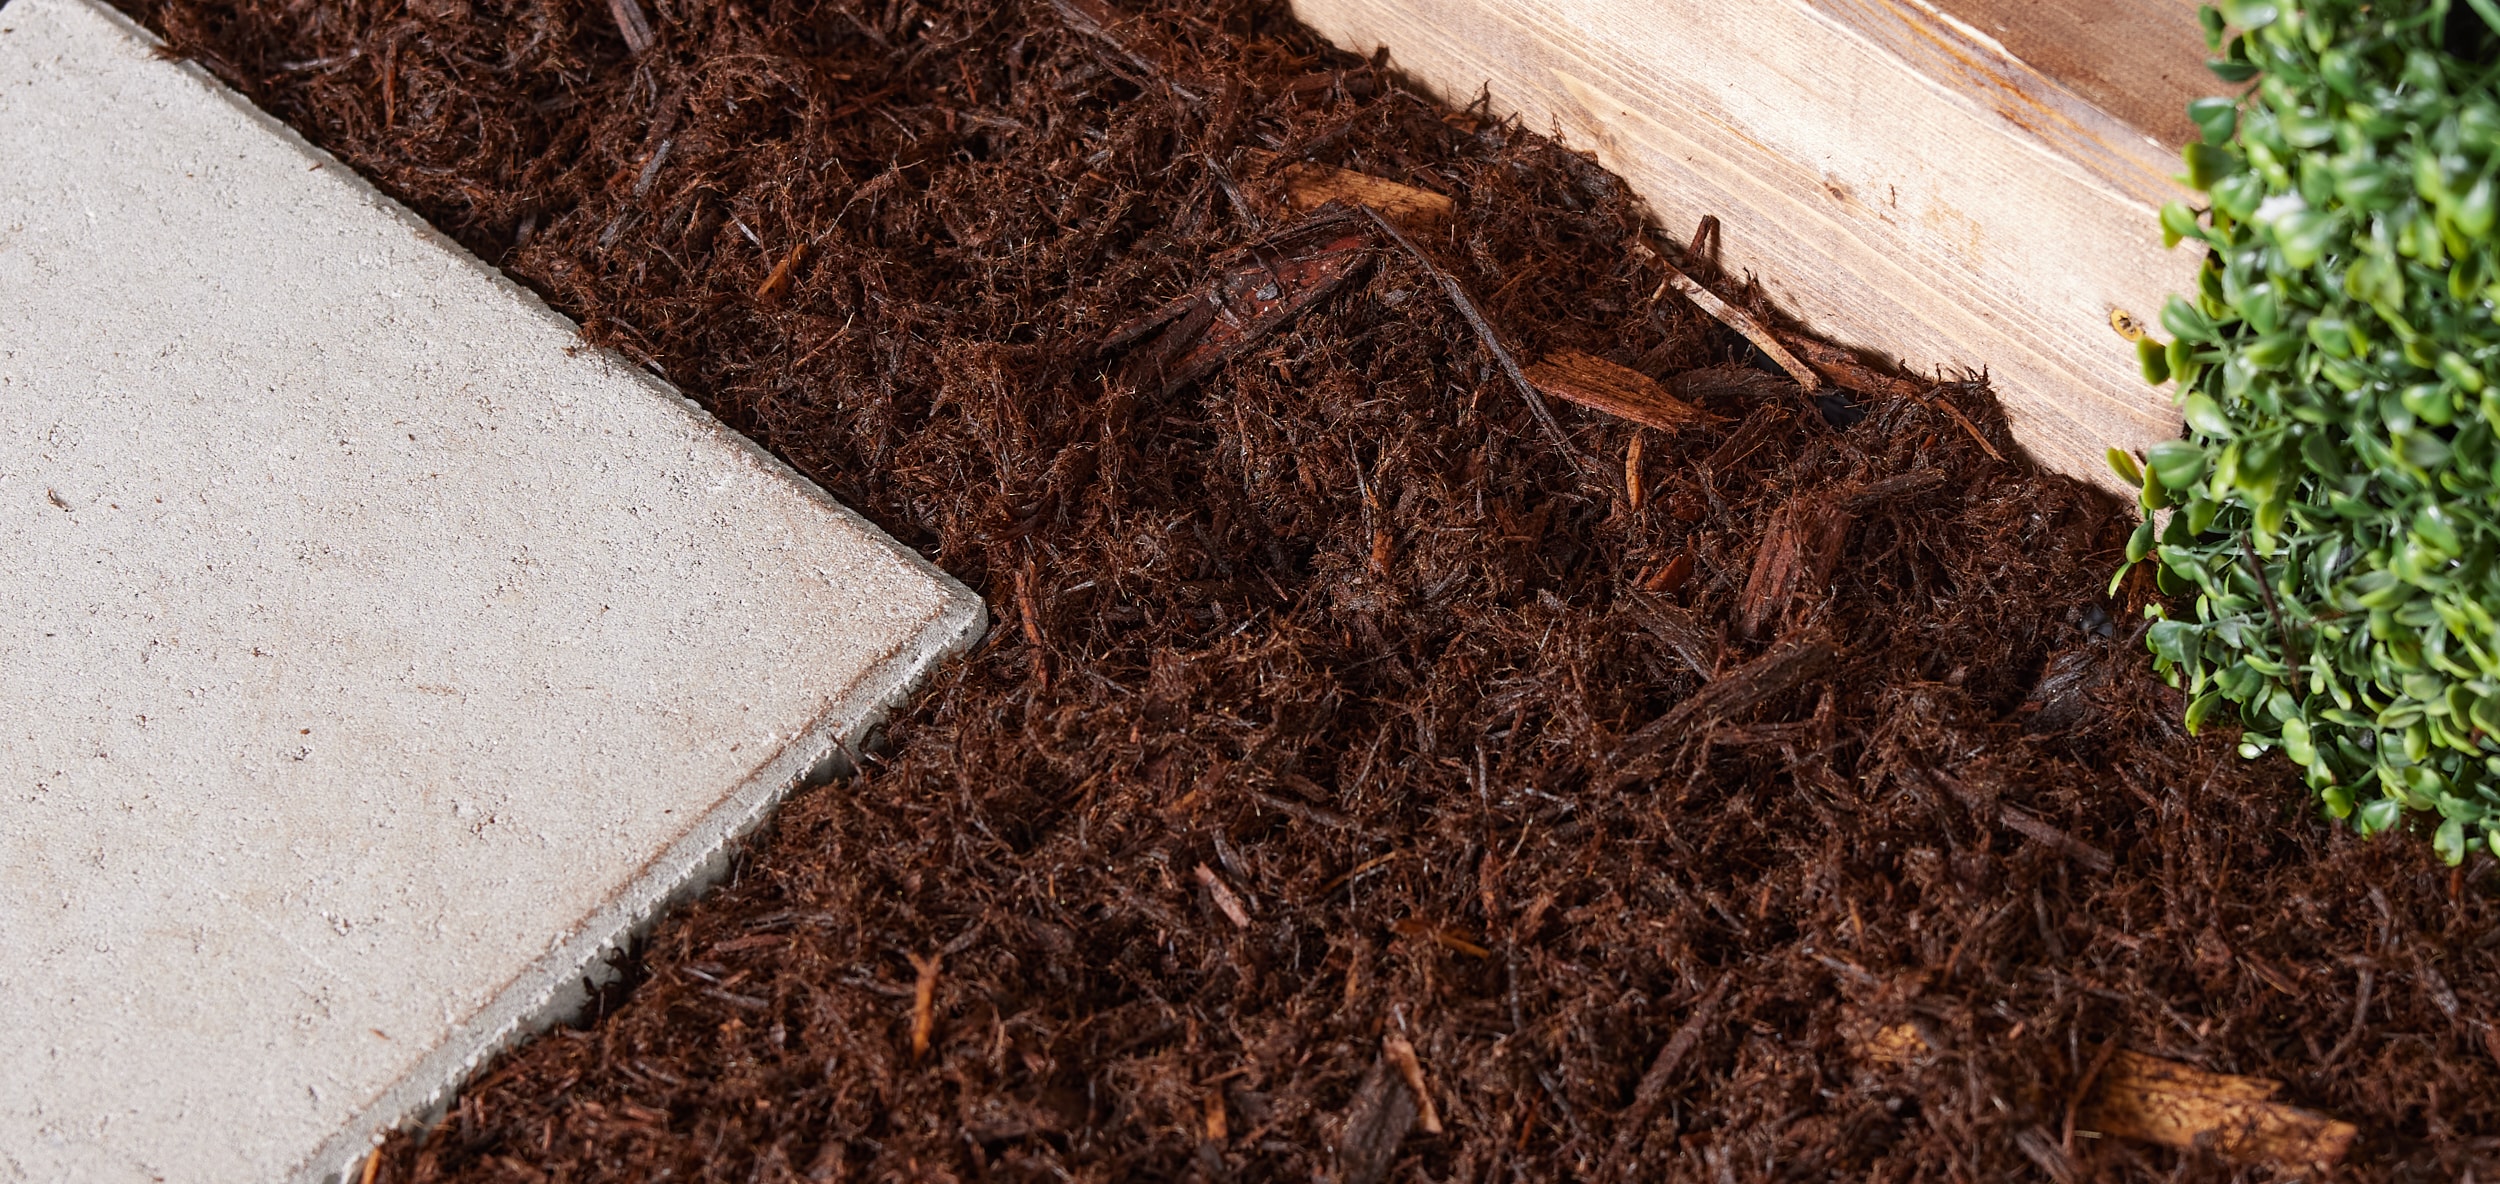 Cedar in & 2-cu Wood Products at Mulch department the Bagged ft Swanson Blend Mulch Red Bark